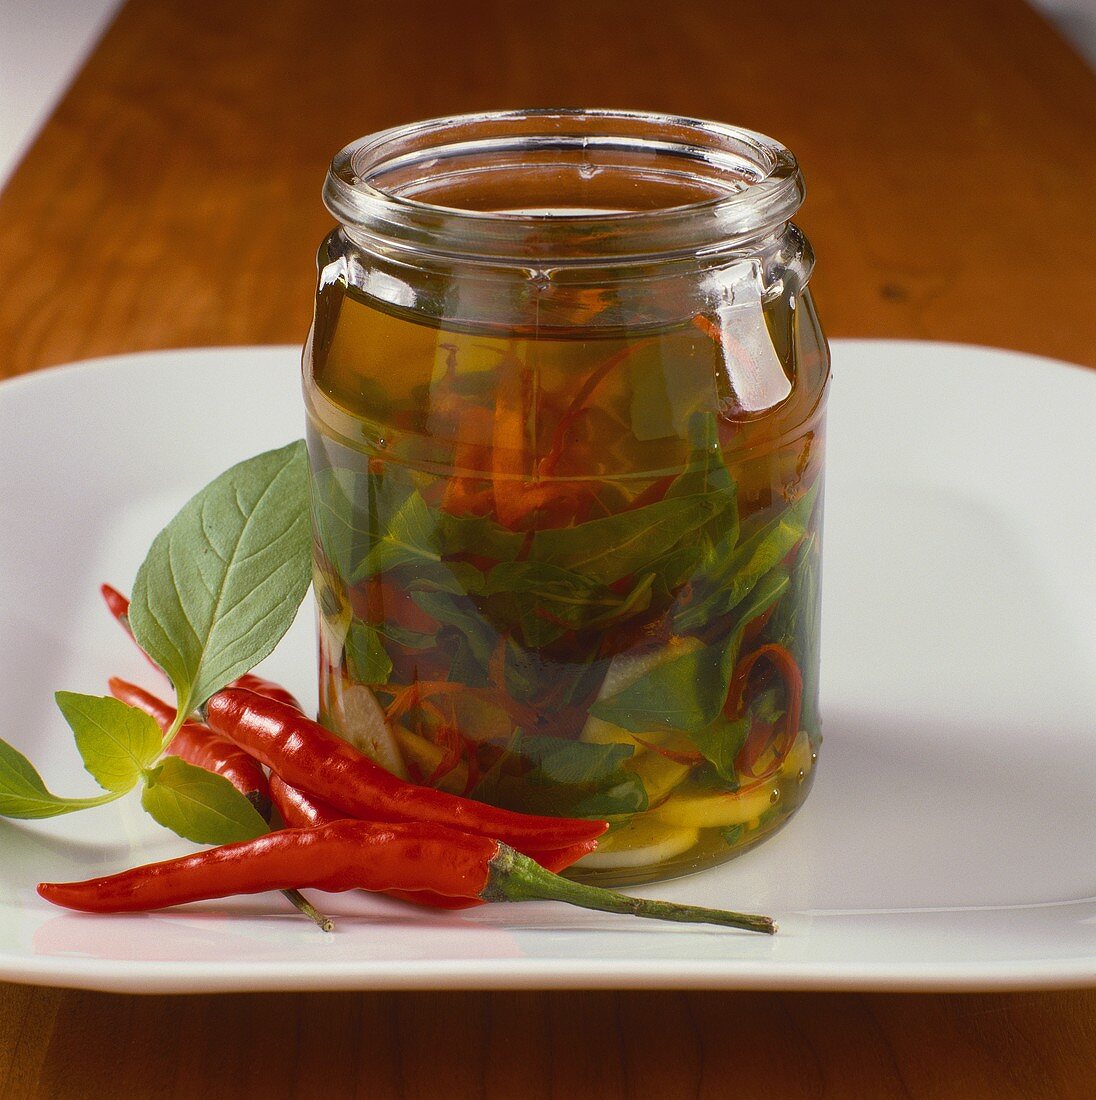 Chili peppers and basil in oil